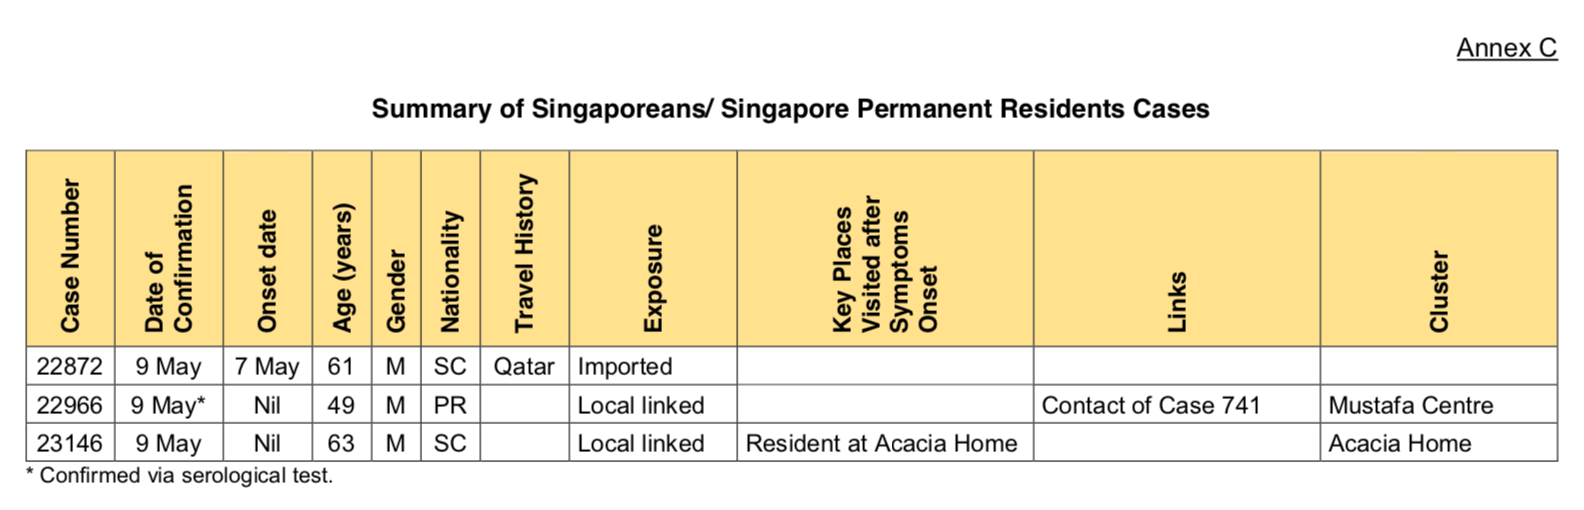 Singaporeans / Singapore Permanent Residents on May 10